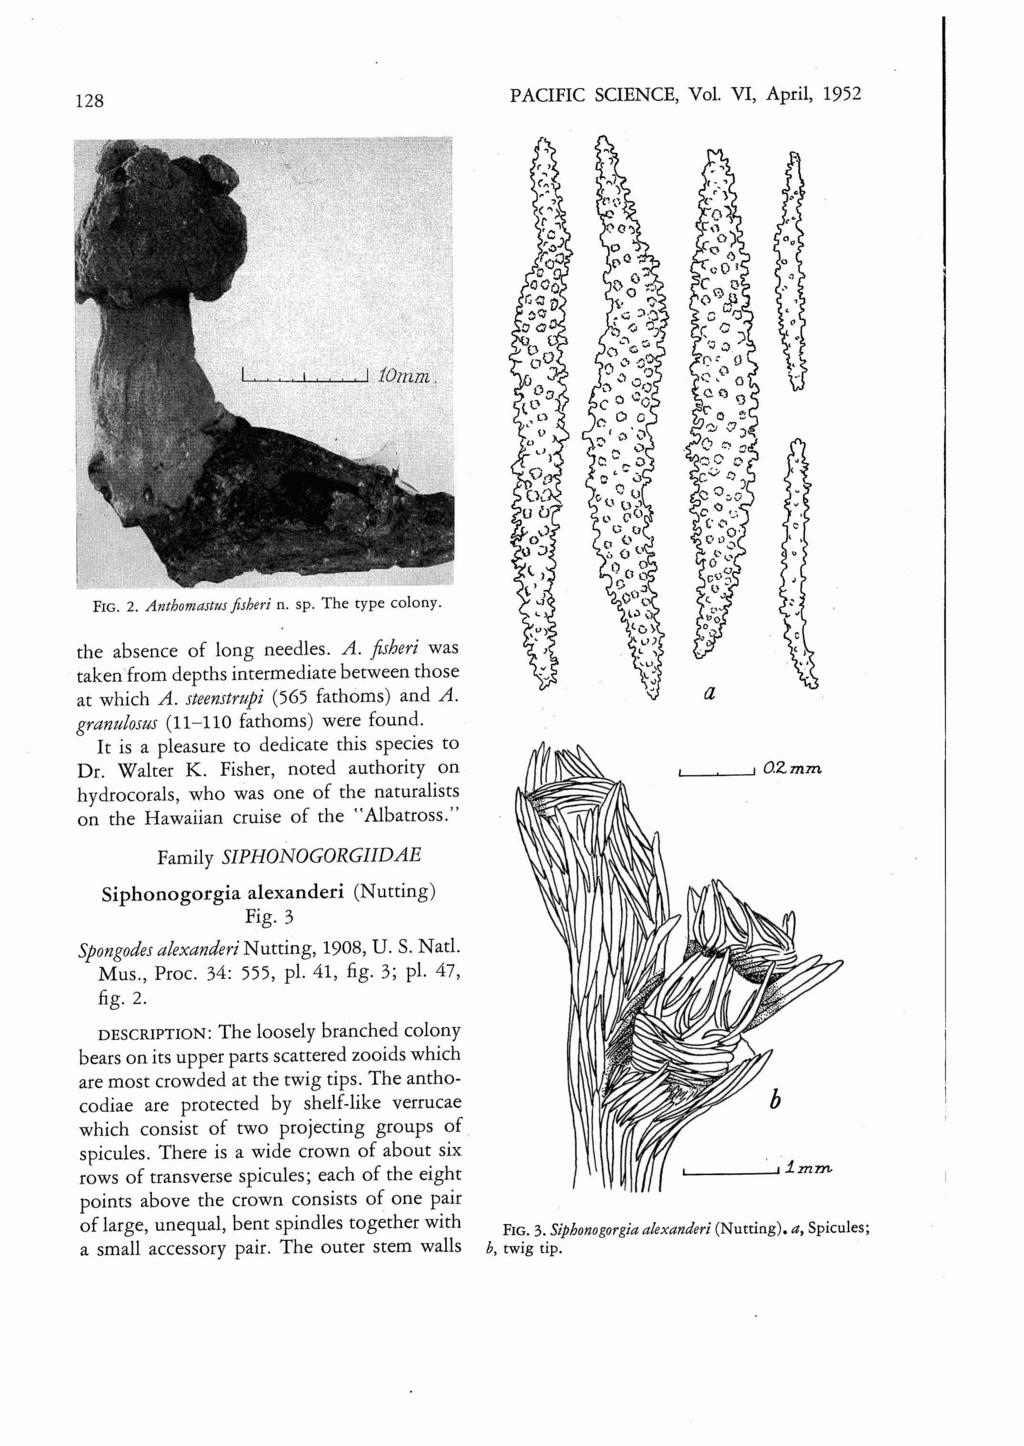 128 PACIFIC SCIENCE, Vol. VI, April, 1952,. FIG. 2. Anthomastus fisberi n. sp. The type colony. the absence of long needles. A. ftsheri was taken from depths intermediate between those at which A.